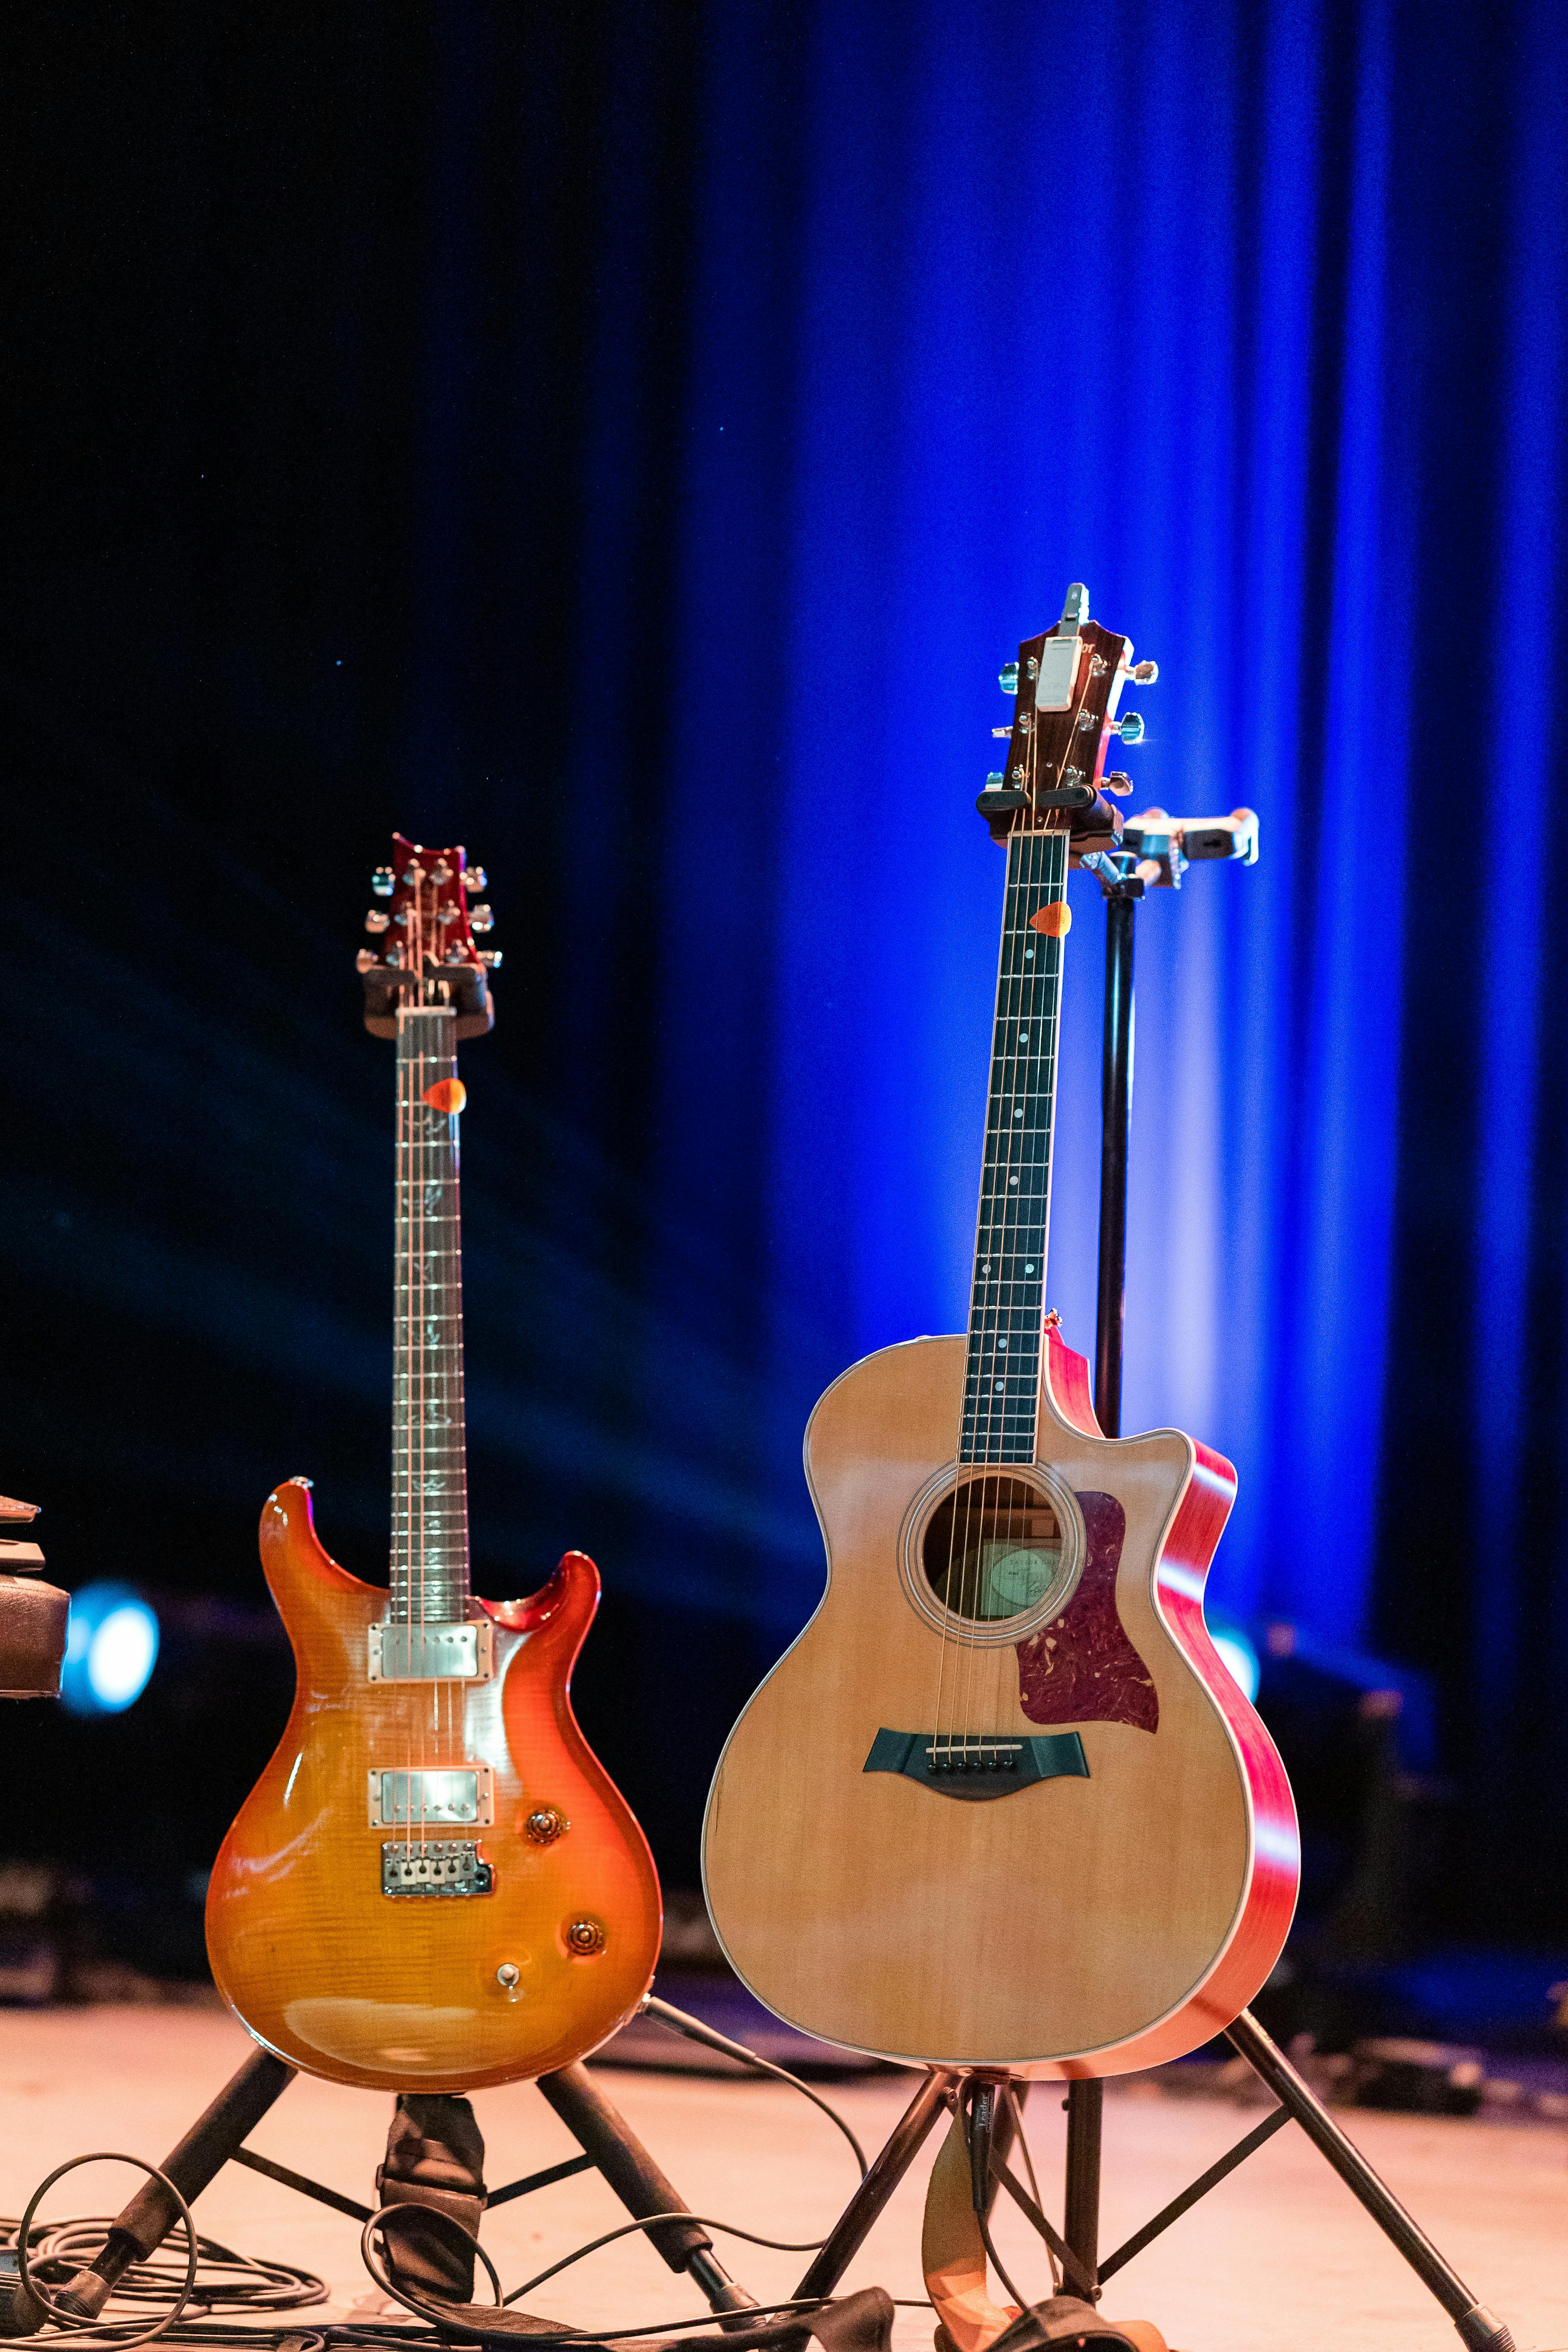 guitars on stage against blue curtains